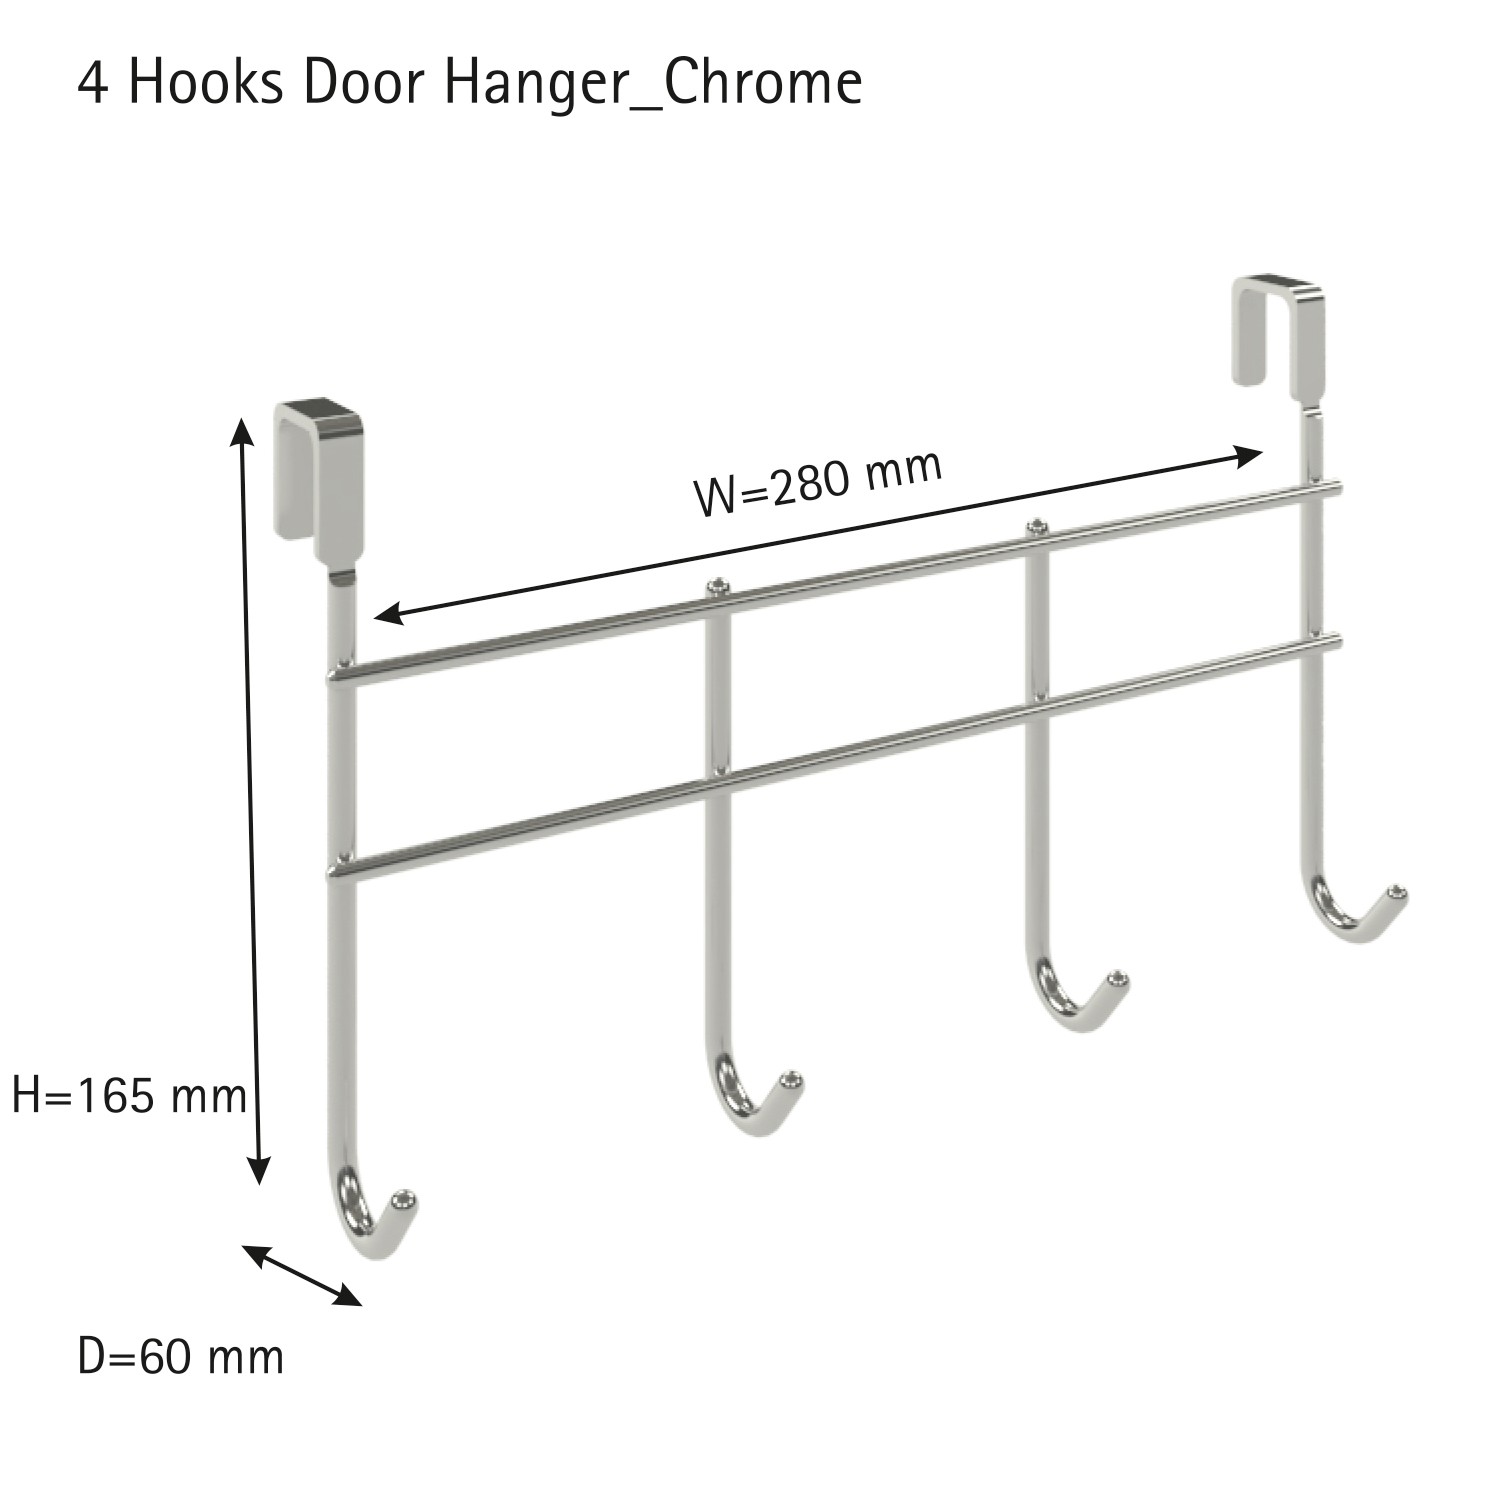 Hettich Cargo Wardrobe Accessories | Hettich's range of Cargo Wardrobe  Accessories are designed to organise your wardrobe perfectly in a  space-efficient manner. Made of stainless steel, the... | By Hettich  IndiaFacebook